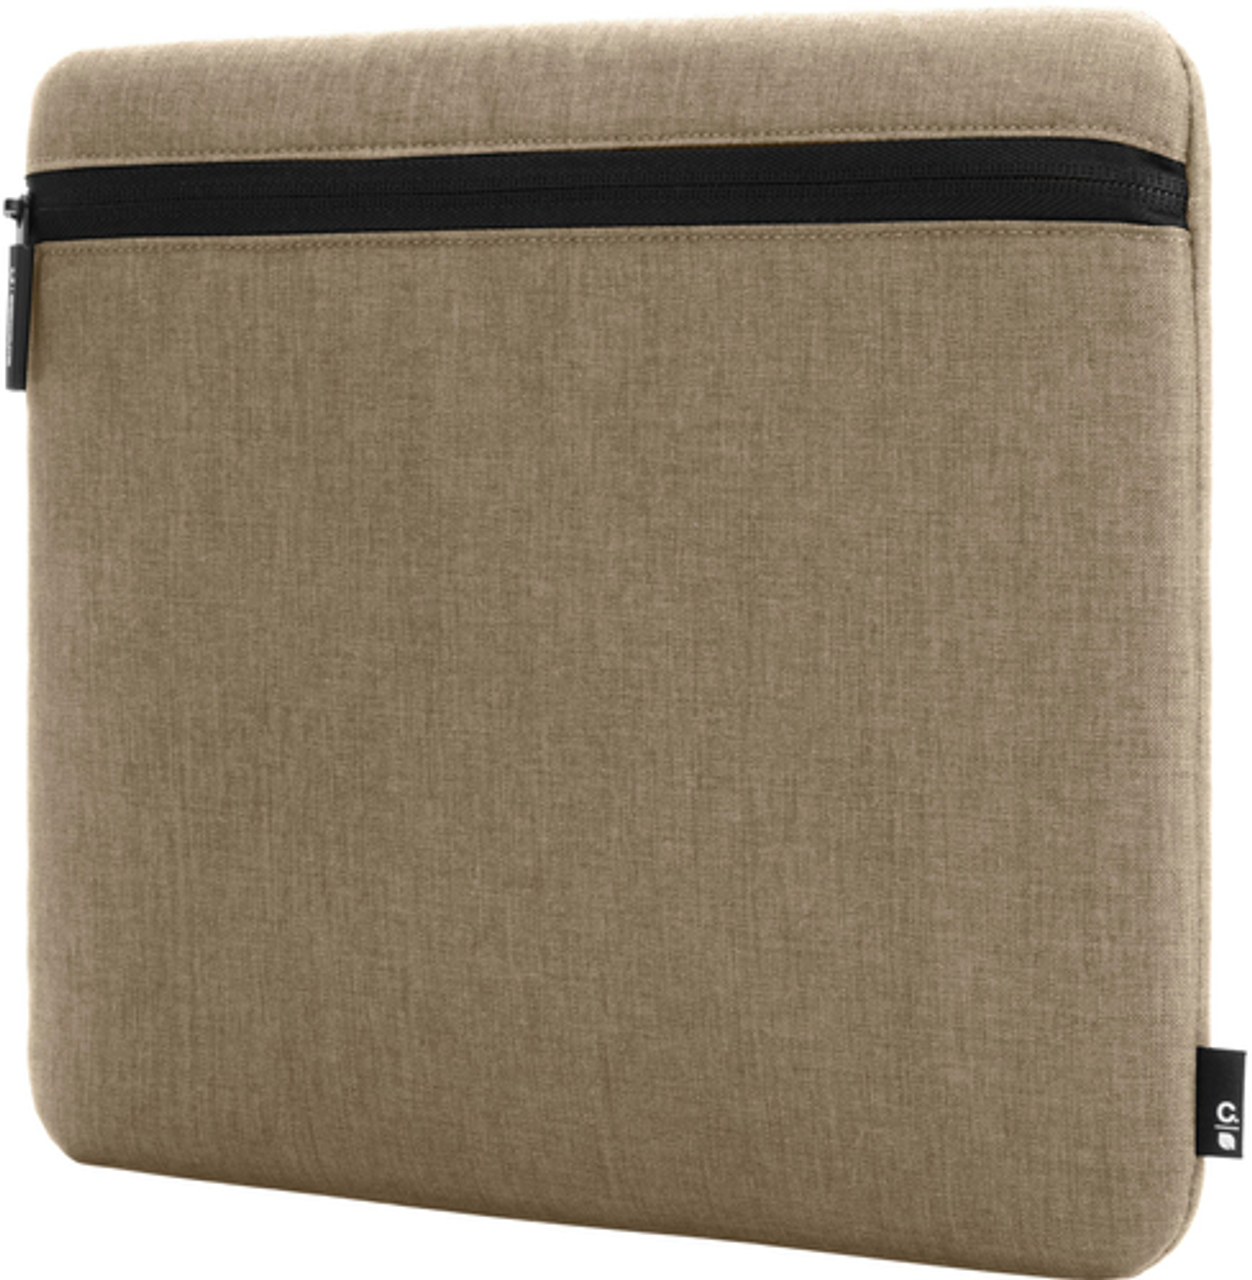 Incase - Carry Zip Sleeve for 13-inch Laptop - Dark Taupe